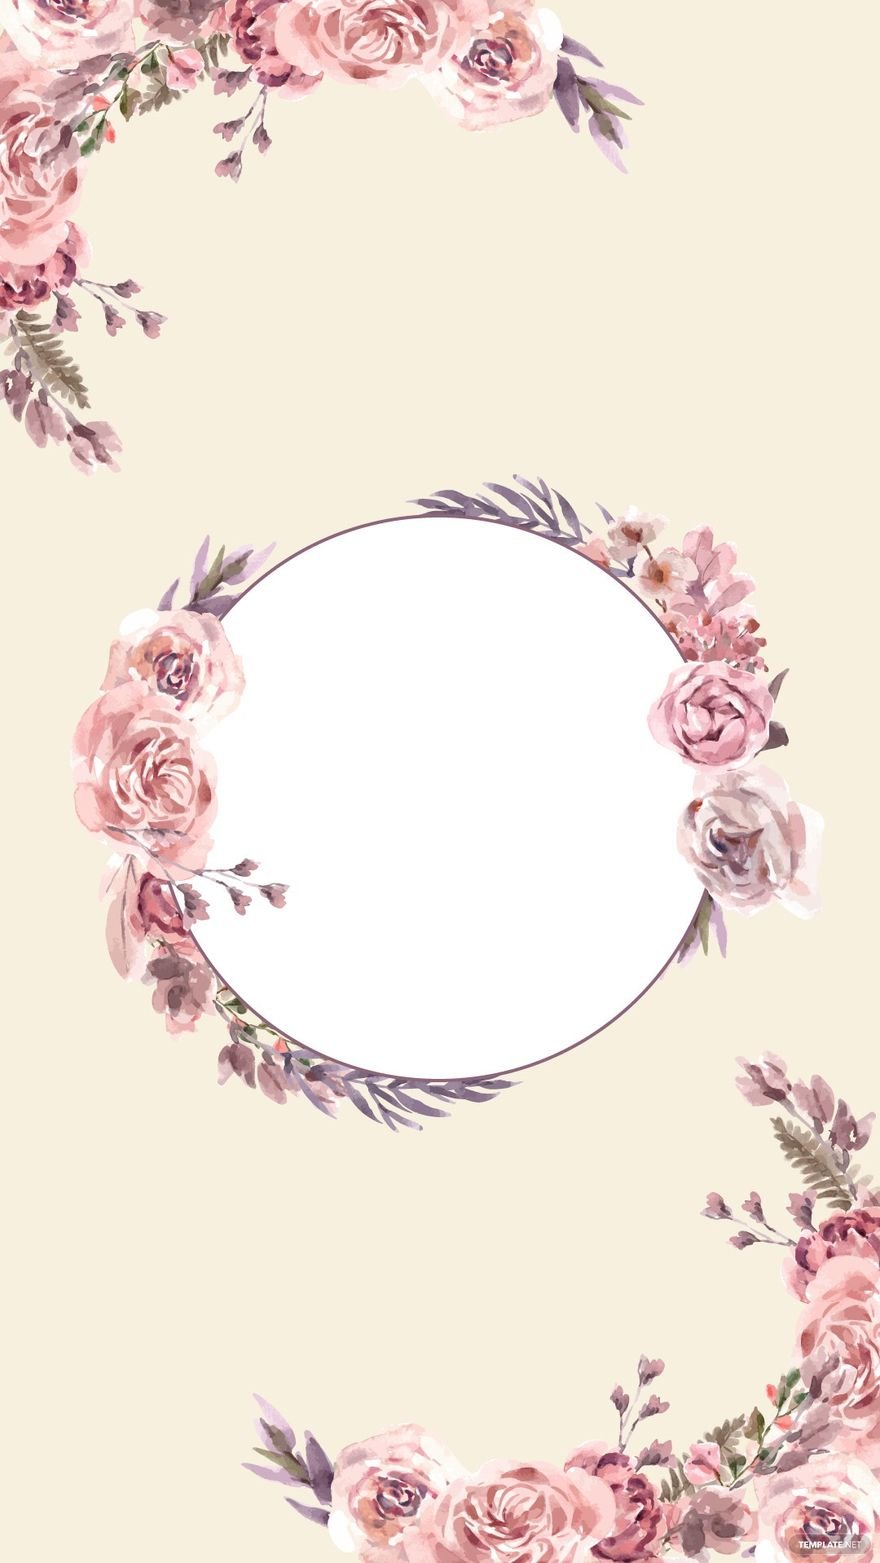 Watercolor Floral Wreath Background